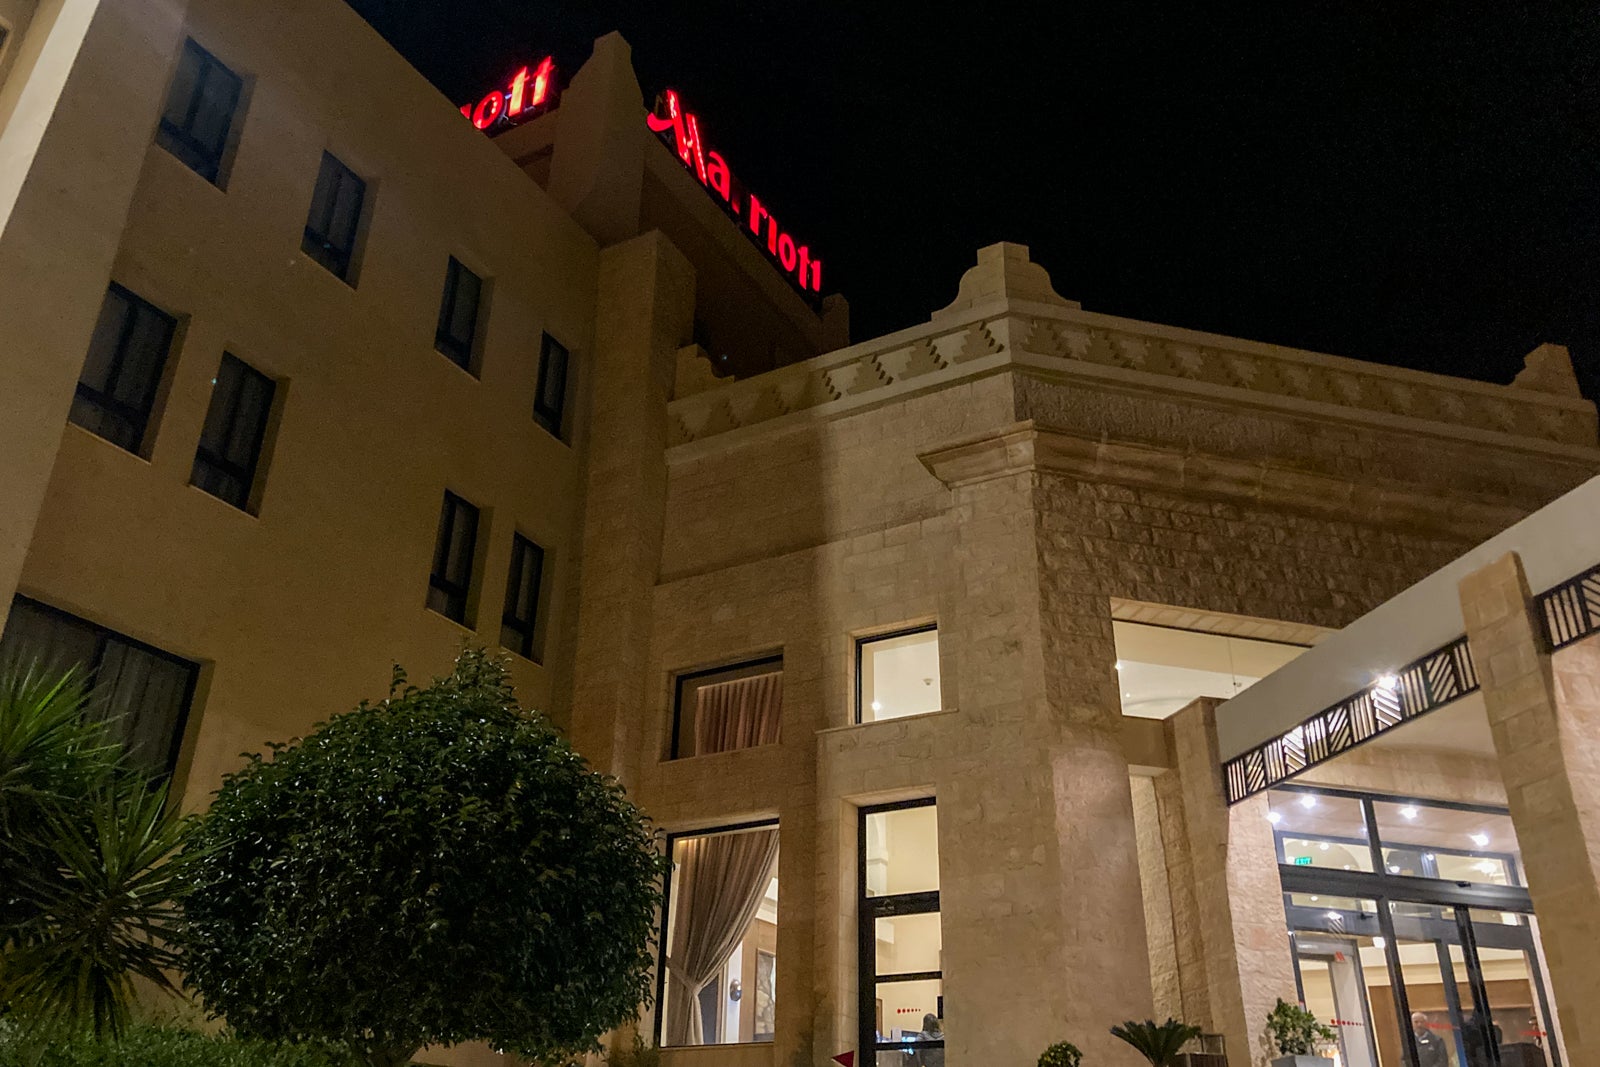 looking up at the entrance to the Petra Marriott Hotel at night, with a lit Marriott logo on top of the hotel